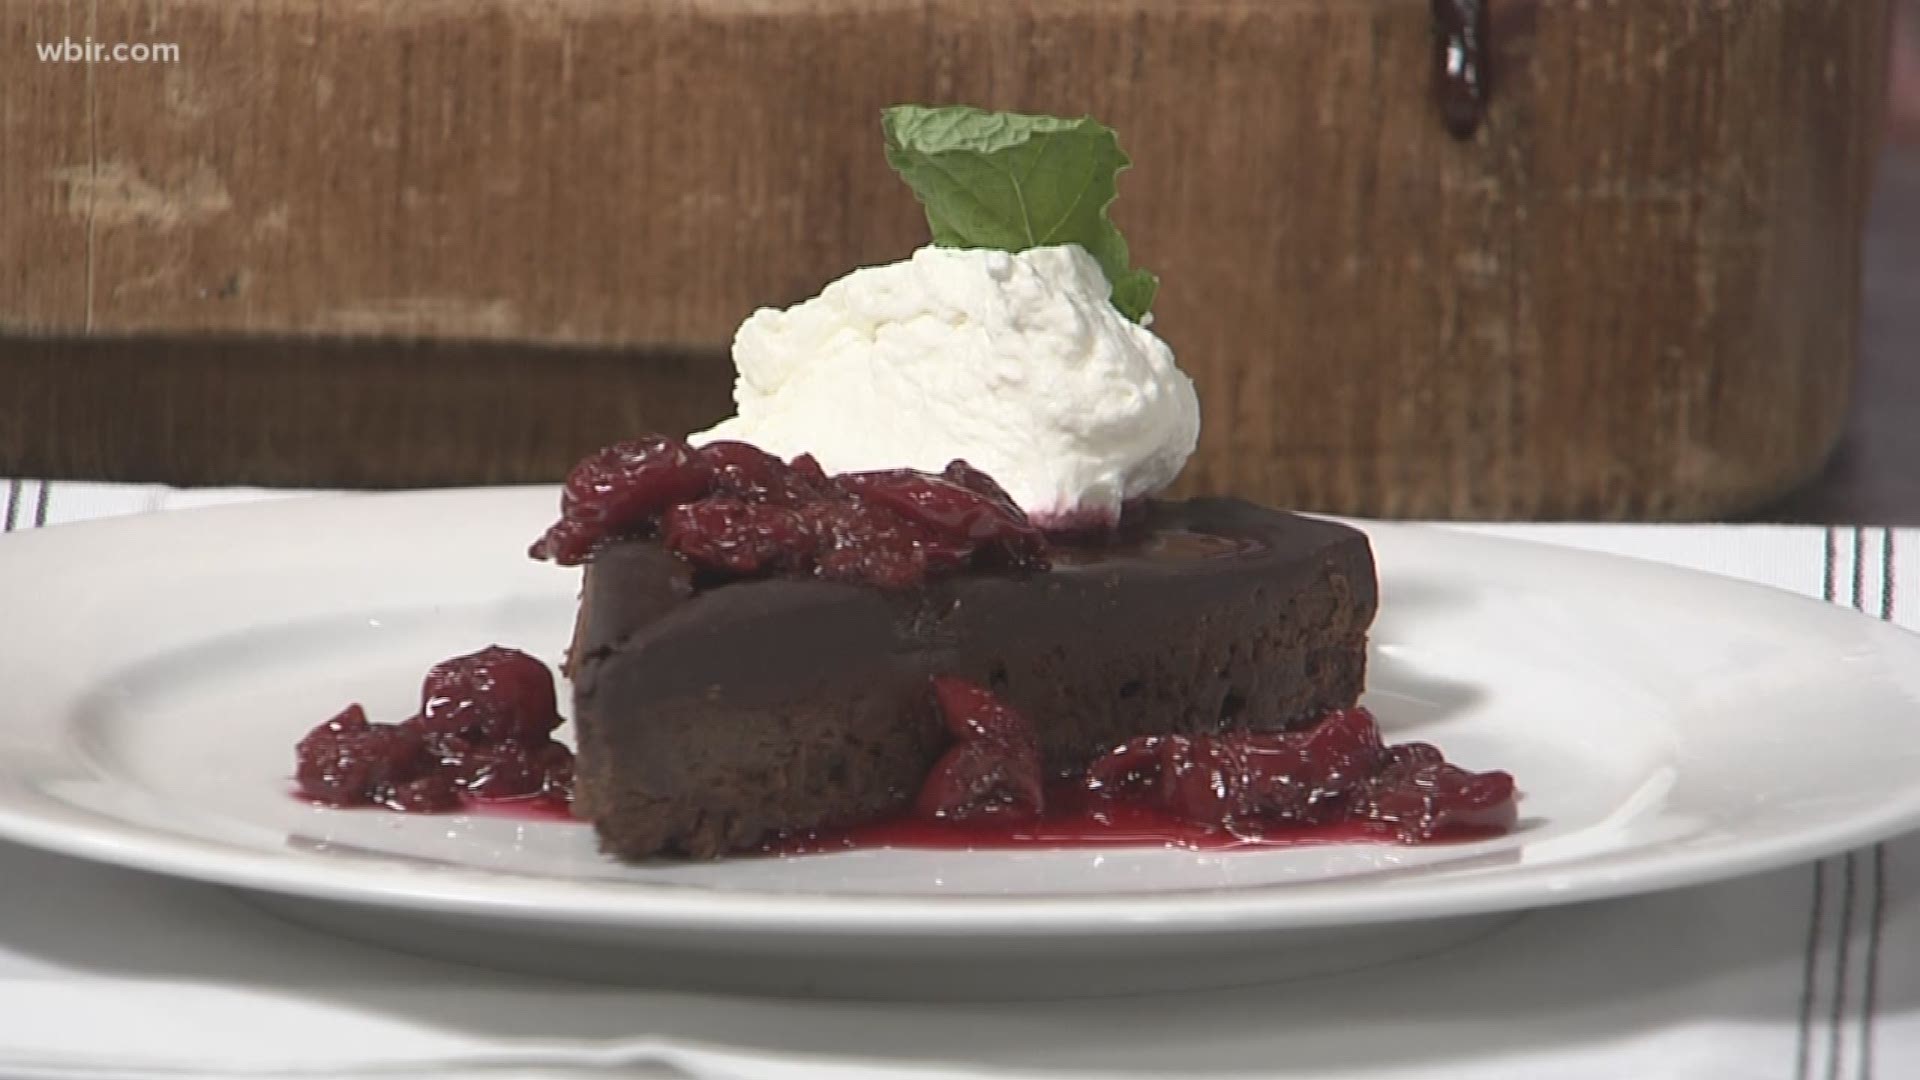 We are in the kitchen with Chef frank now with this delicious dessert.